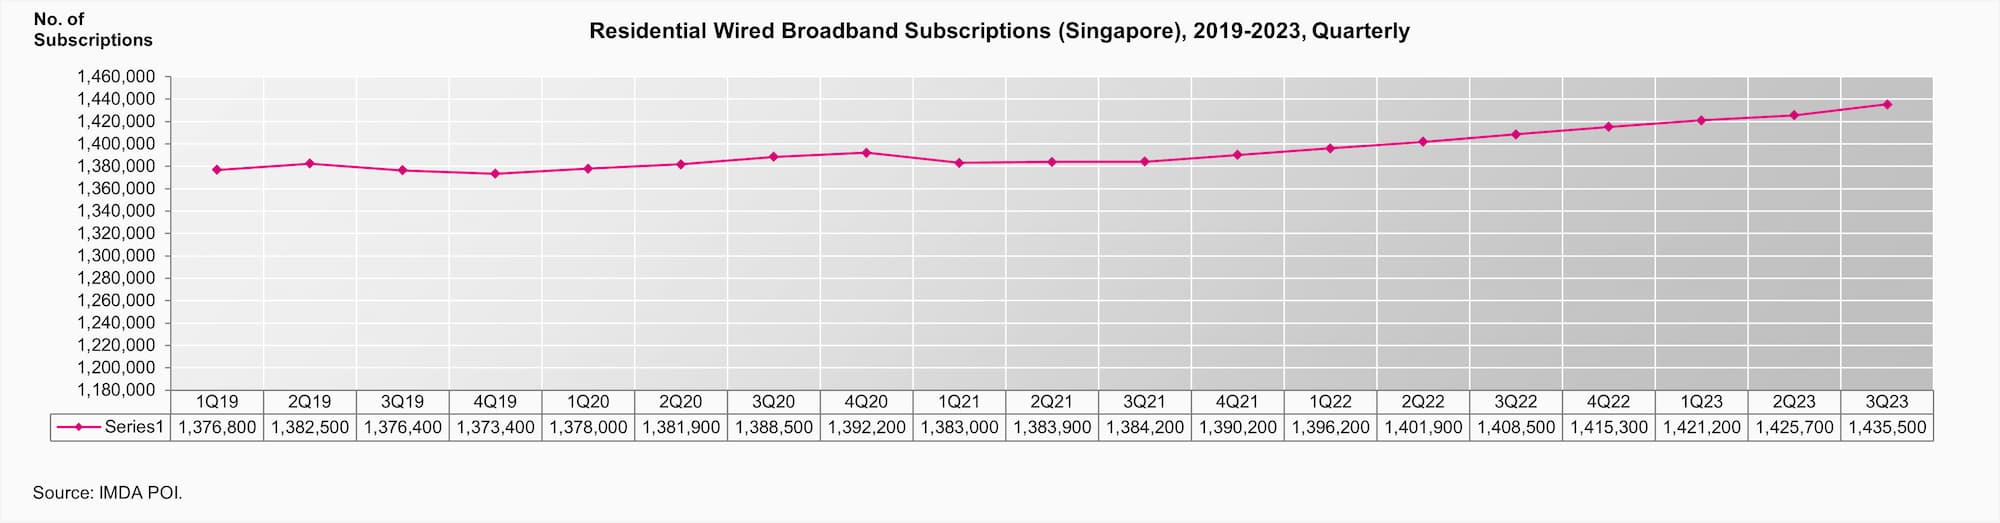 Q3 Residential Wired Broadband Subscriptions